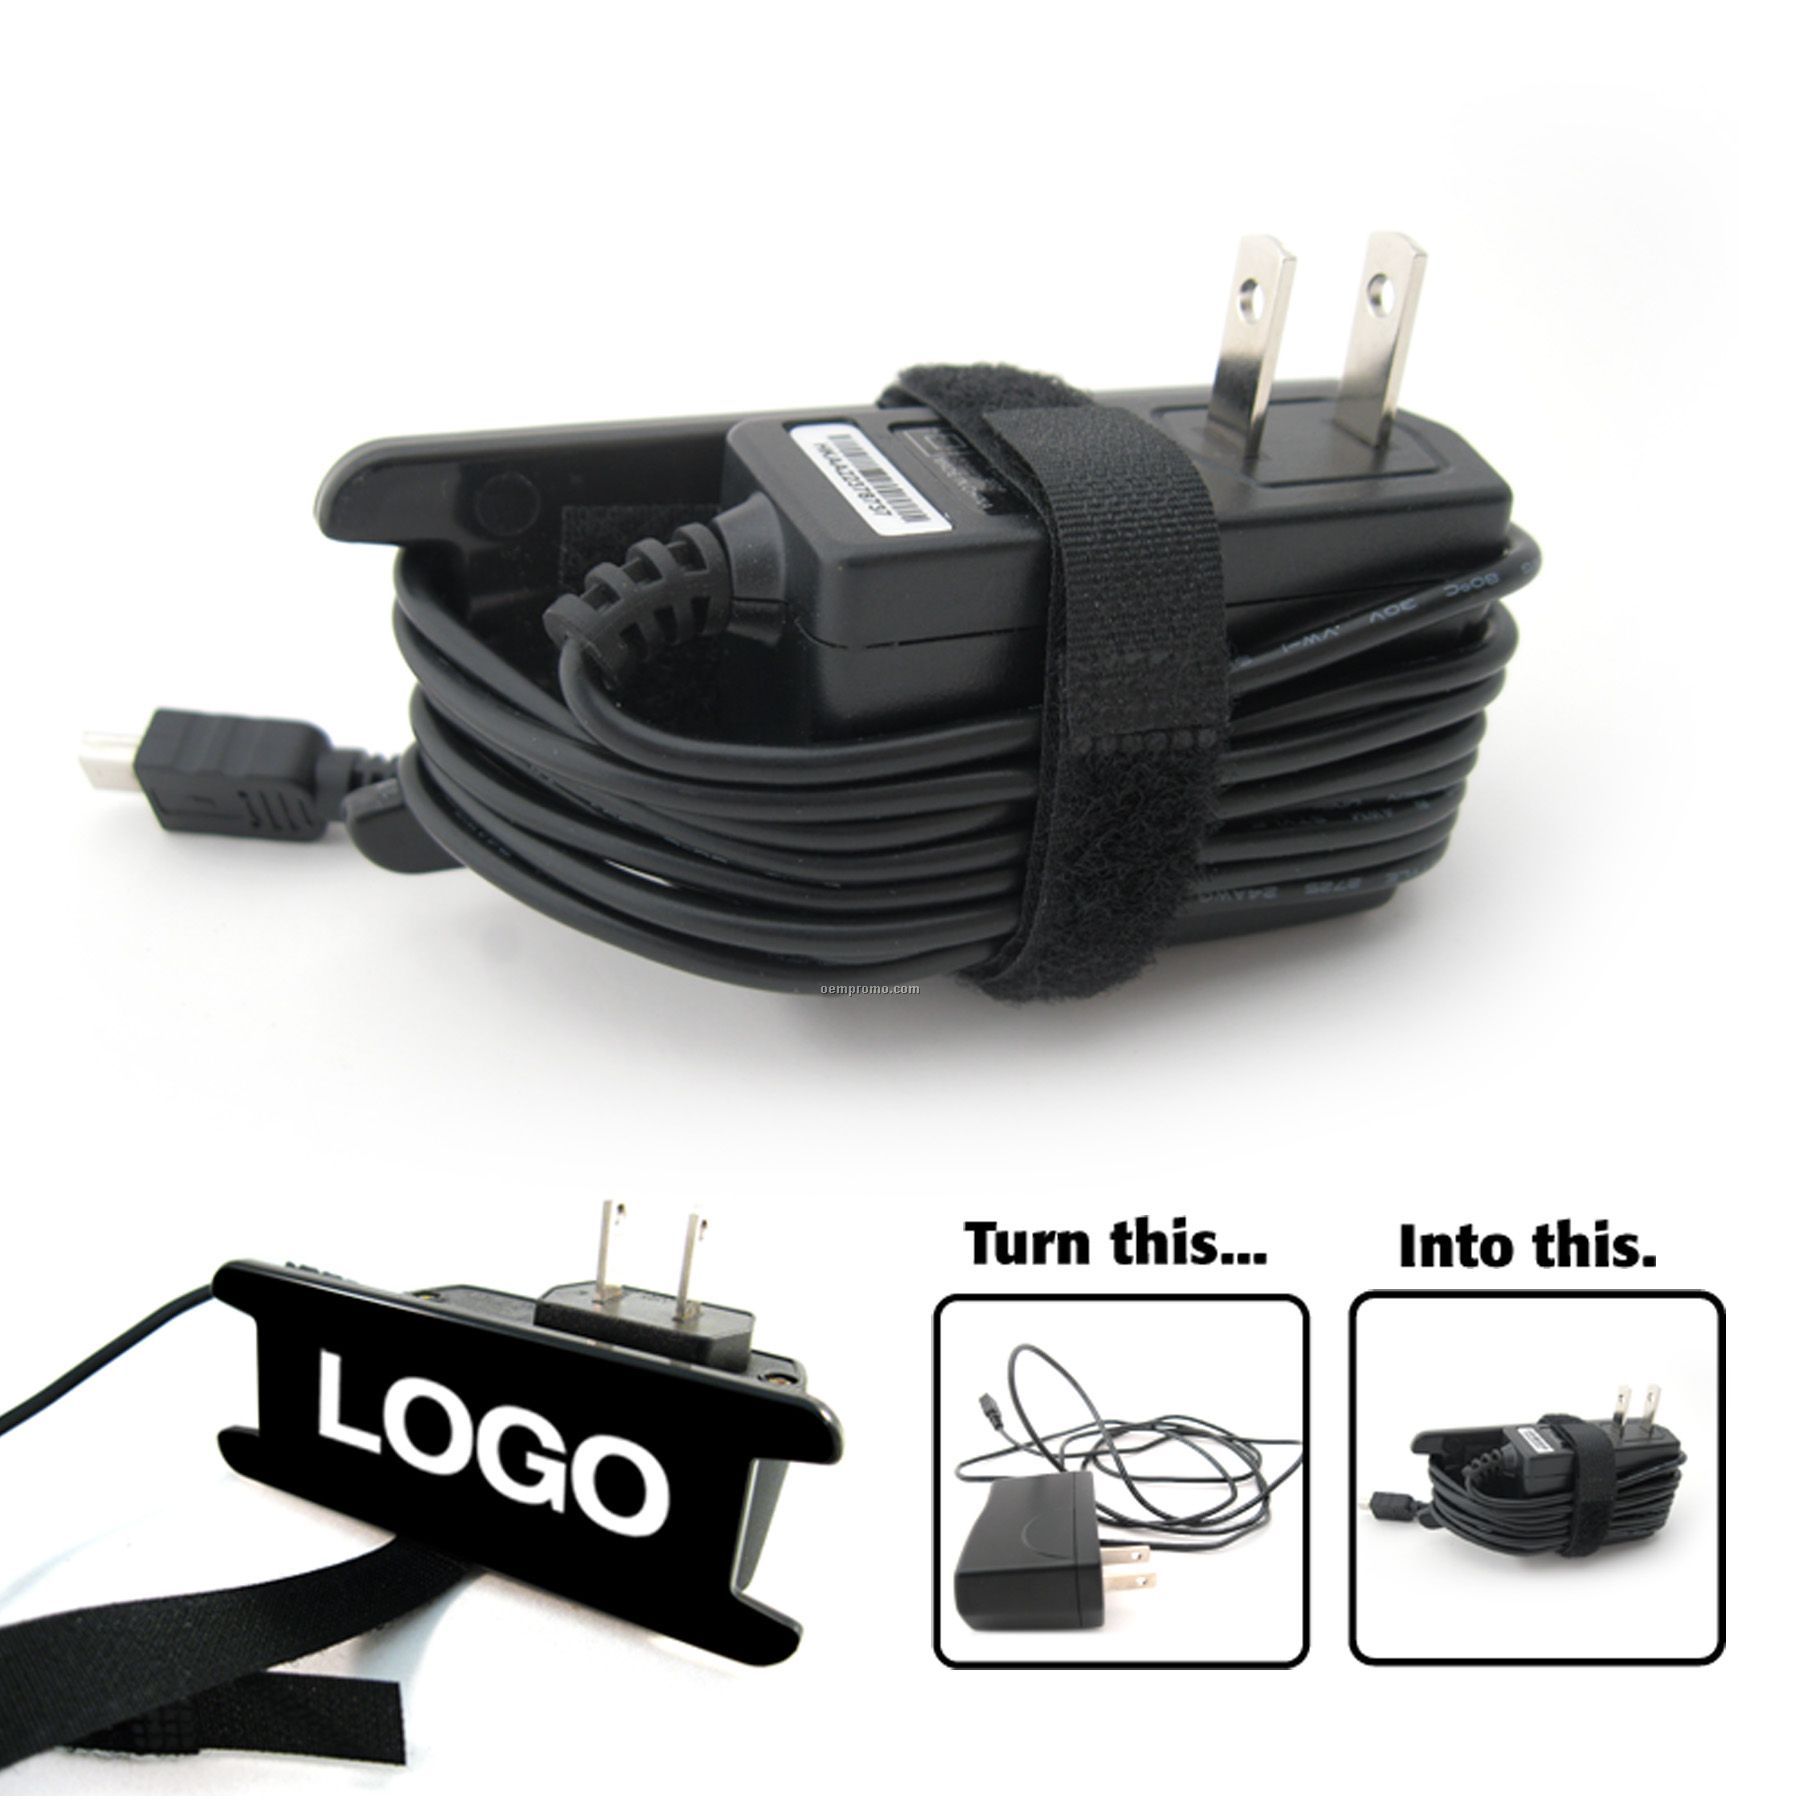 Plug Hugger Mini Cord Organizer For Cell Phone And Other Accessory Chargers